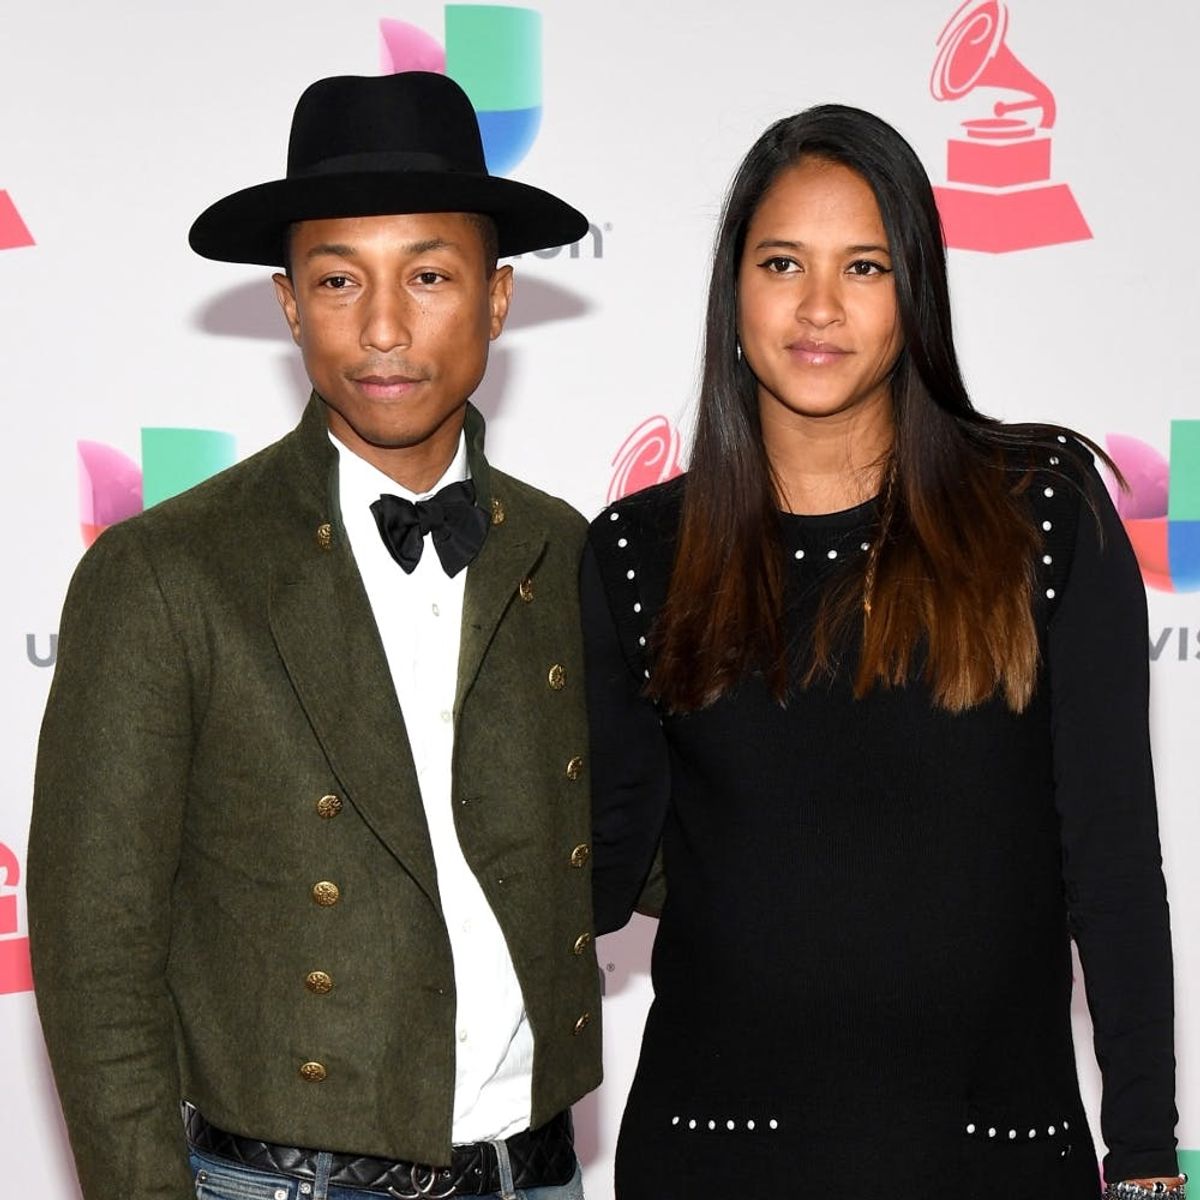 Pharrell Williams Is Now a Daddy to Baby TRIPLETS